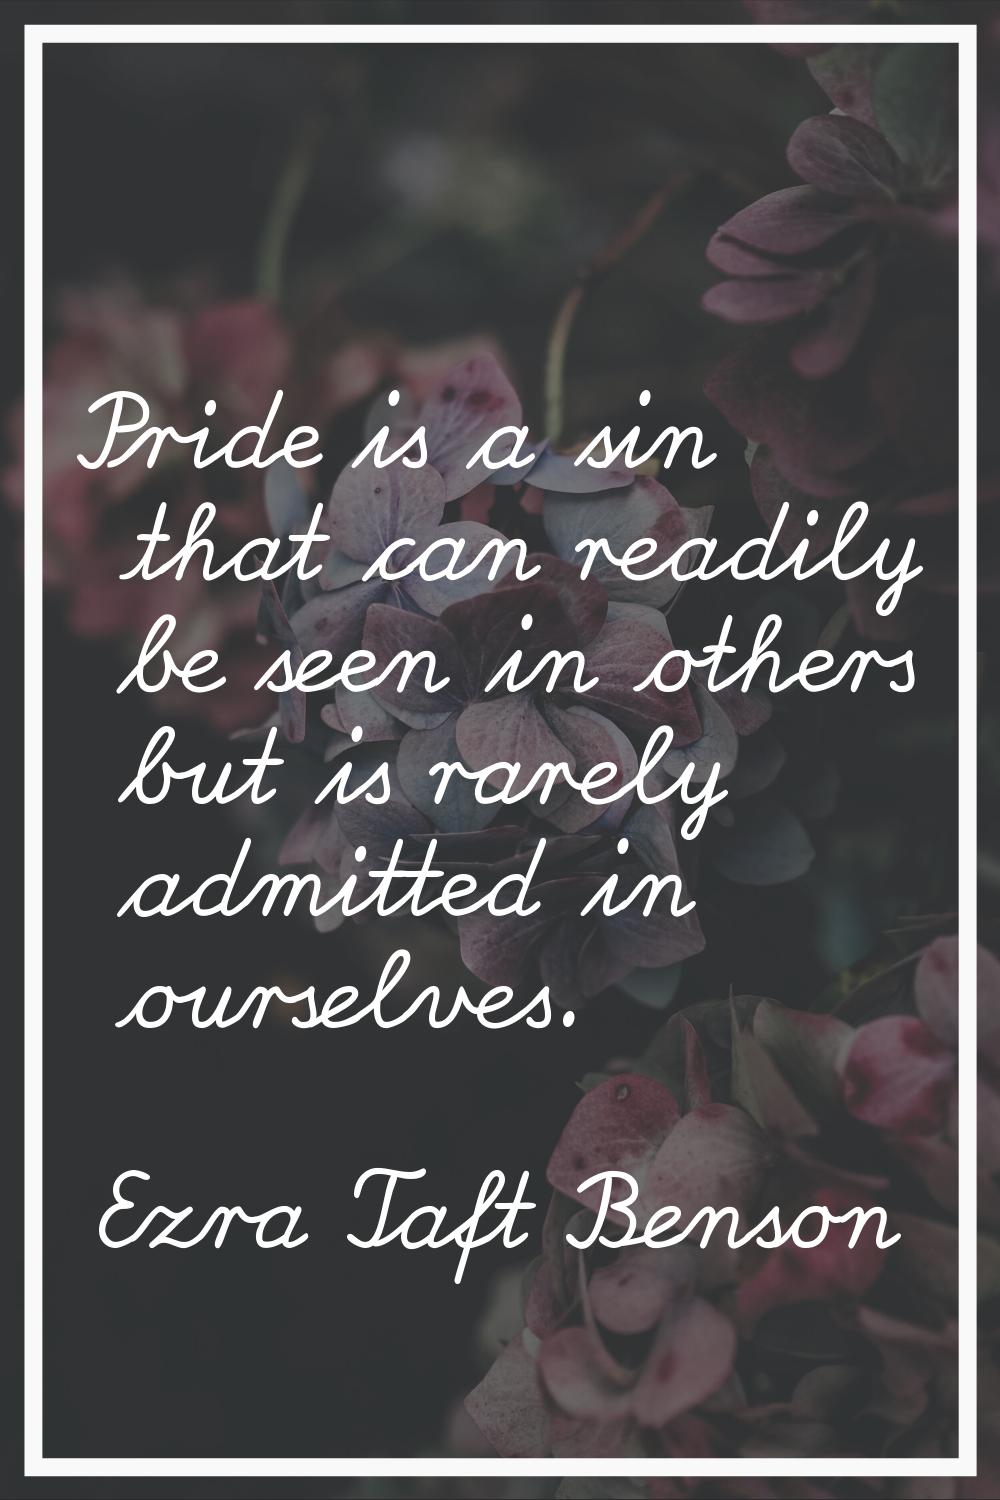 Pride is a sin that can readily be seen in others but is rarely admitted in ourselves.